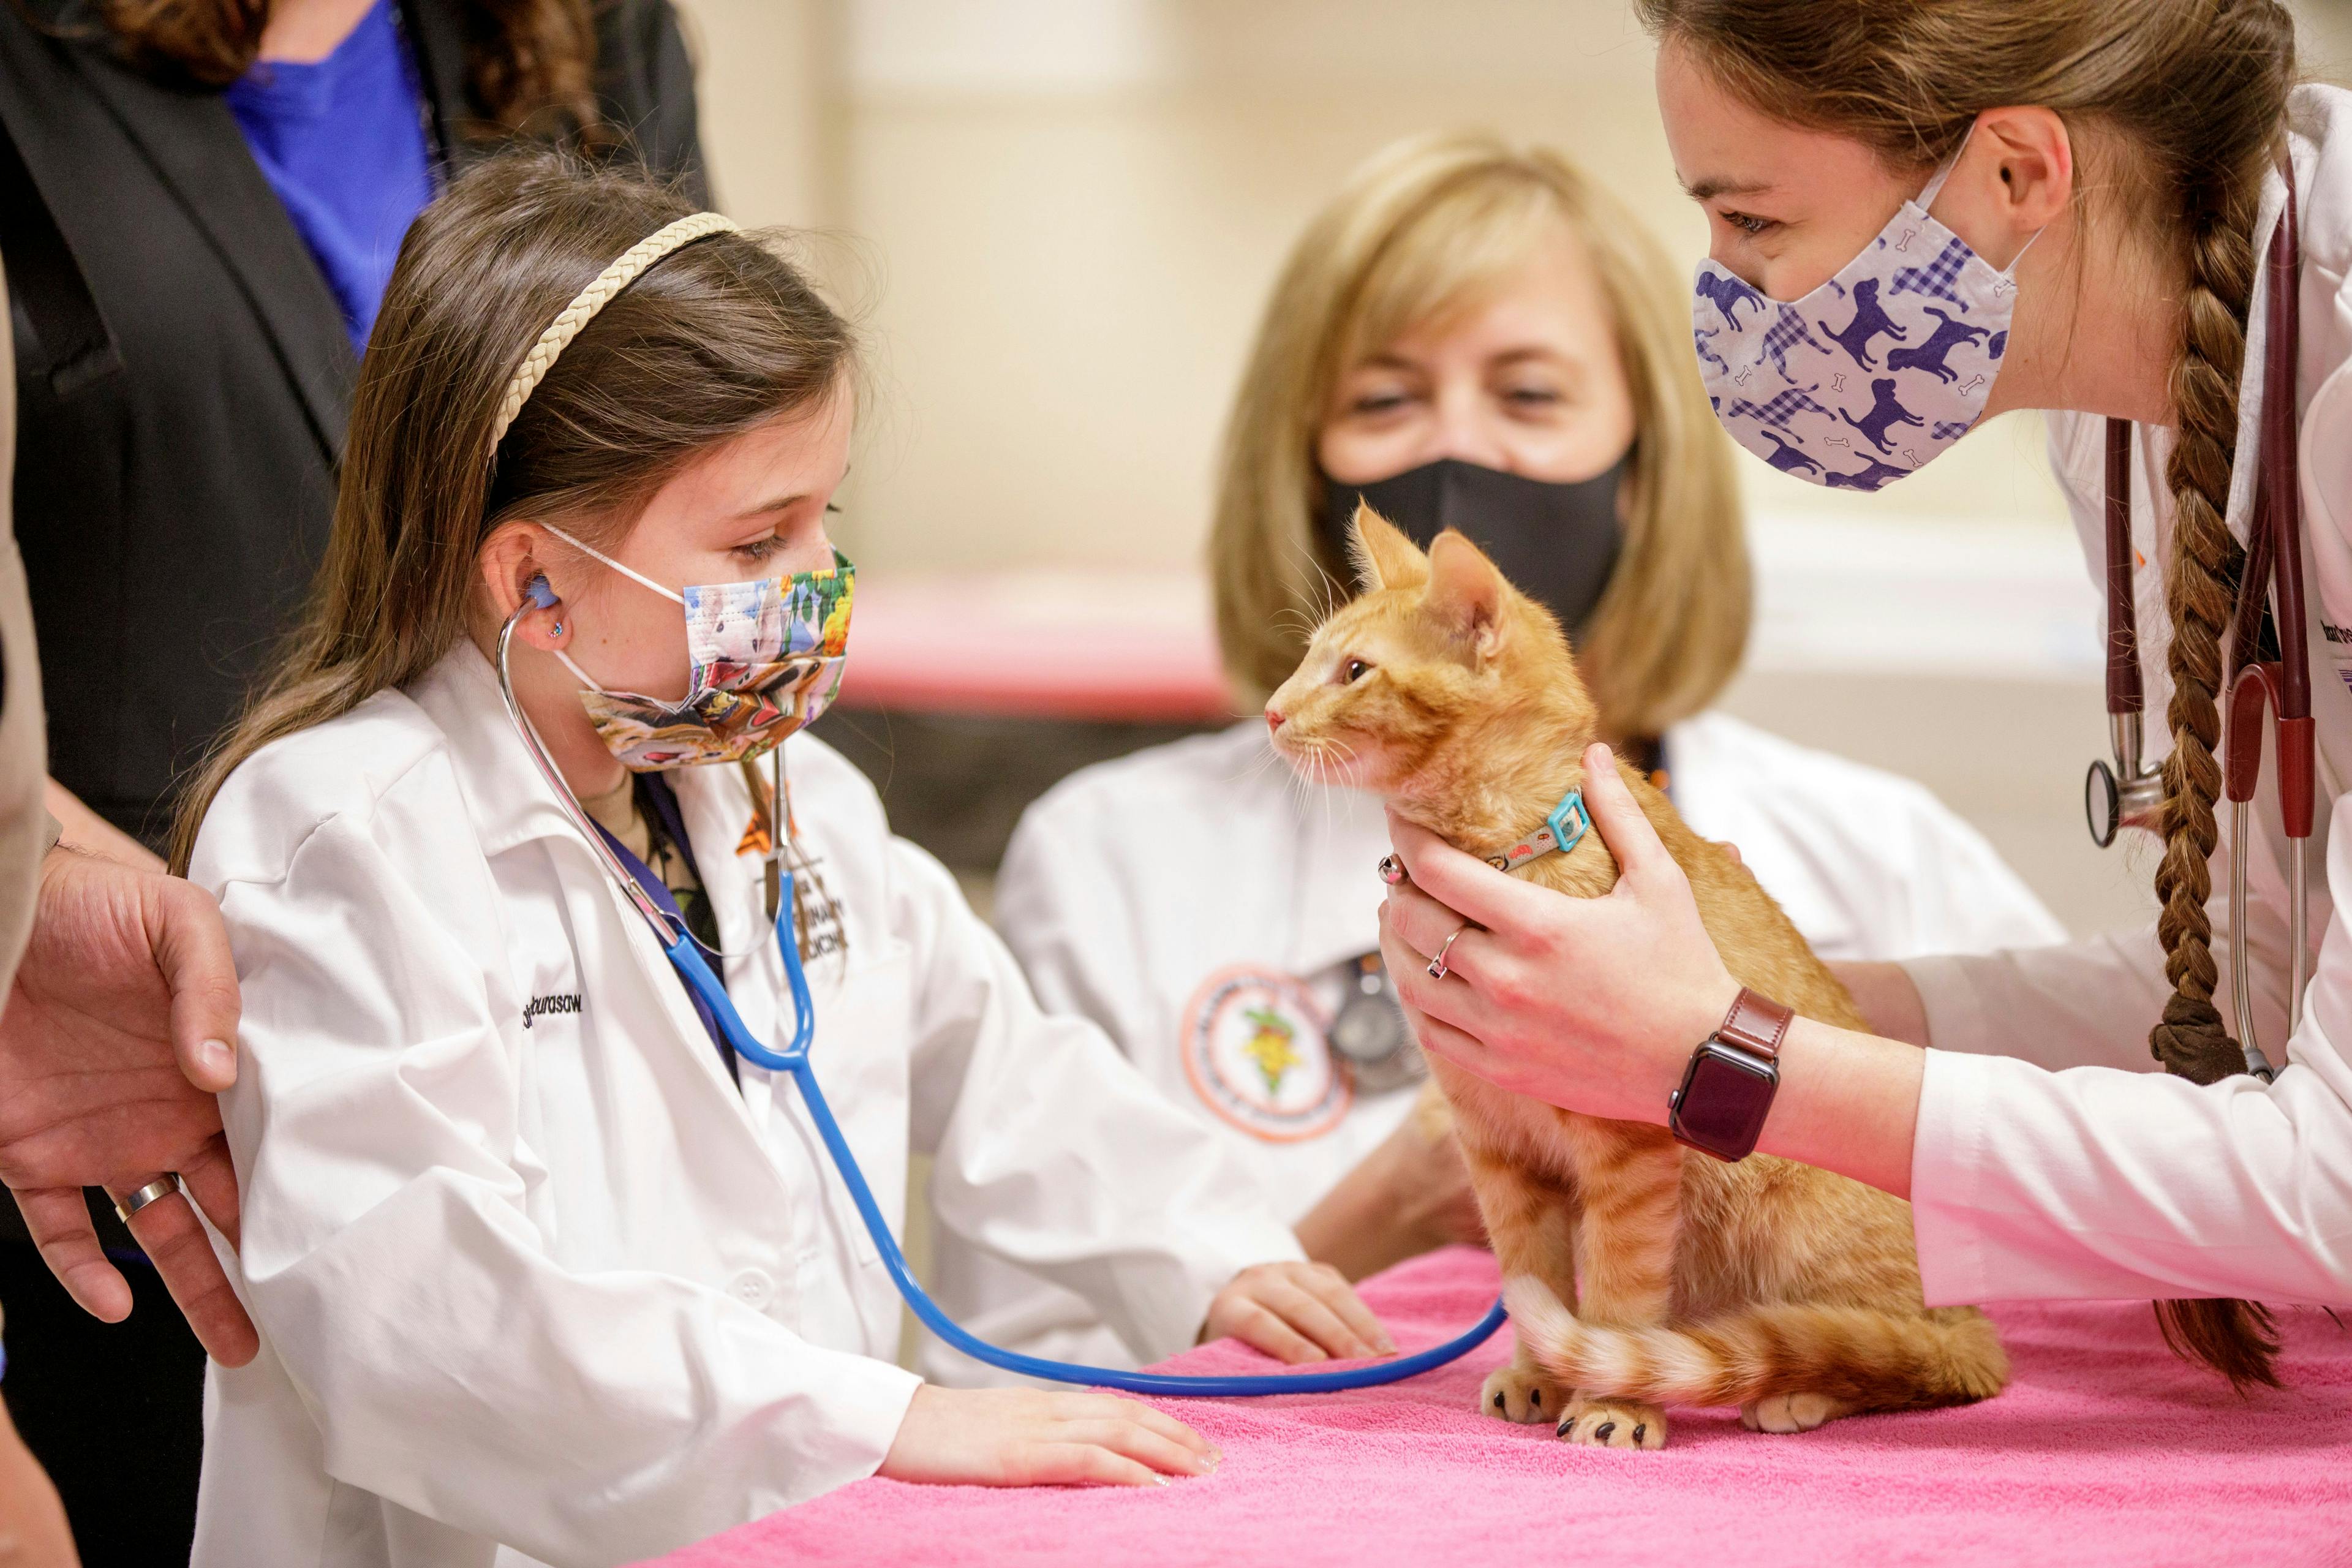 8-year-old patient with cancer becomes veterinarian for a day